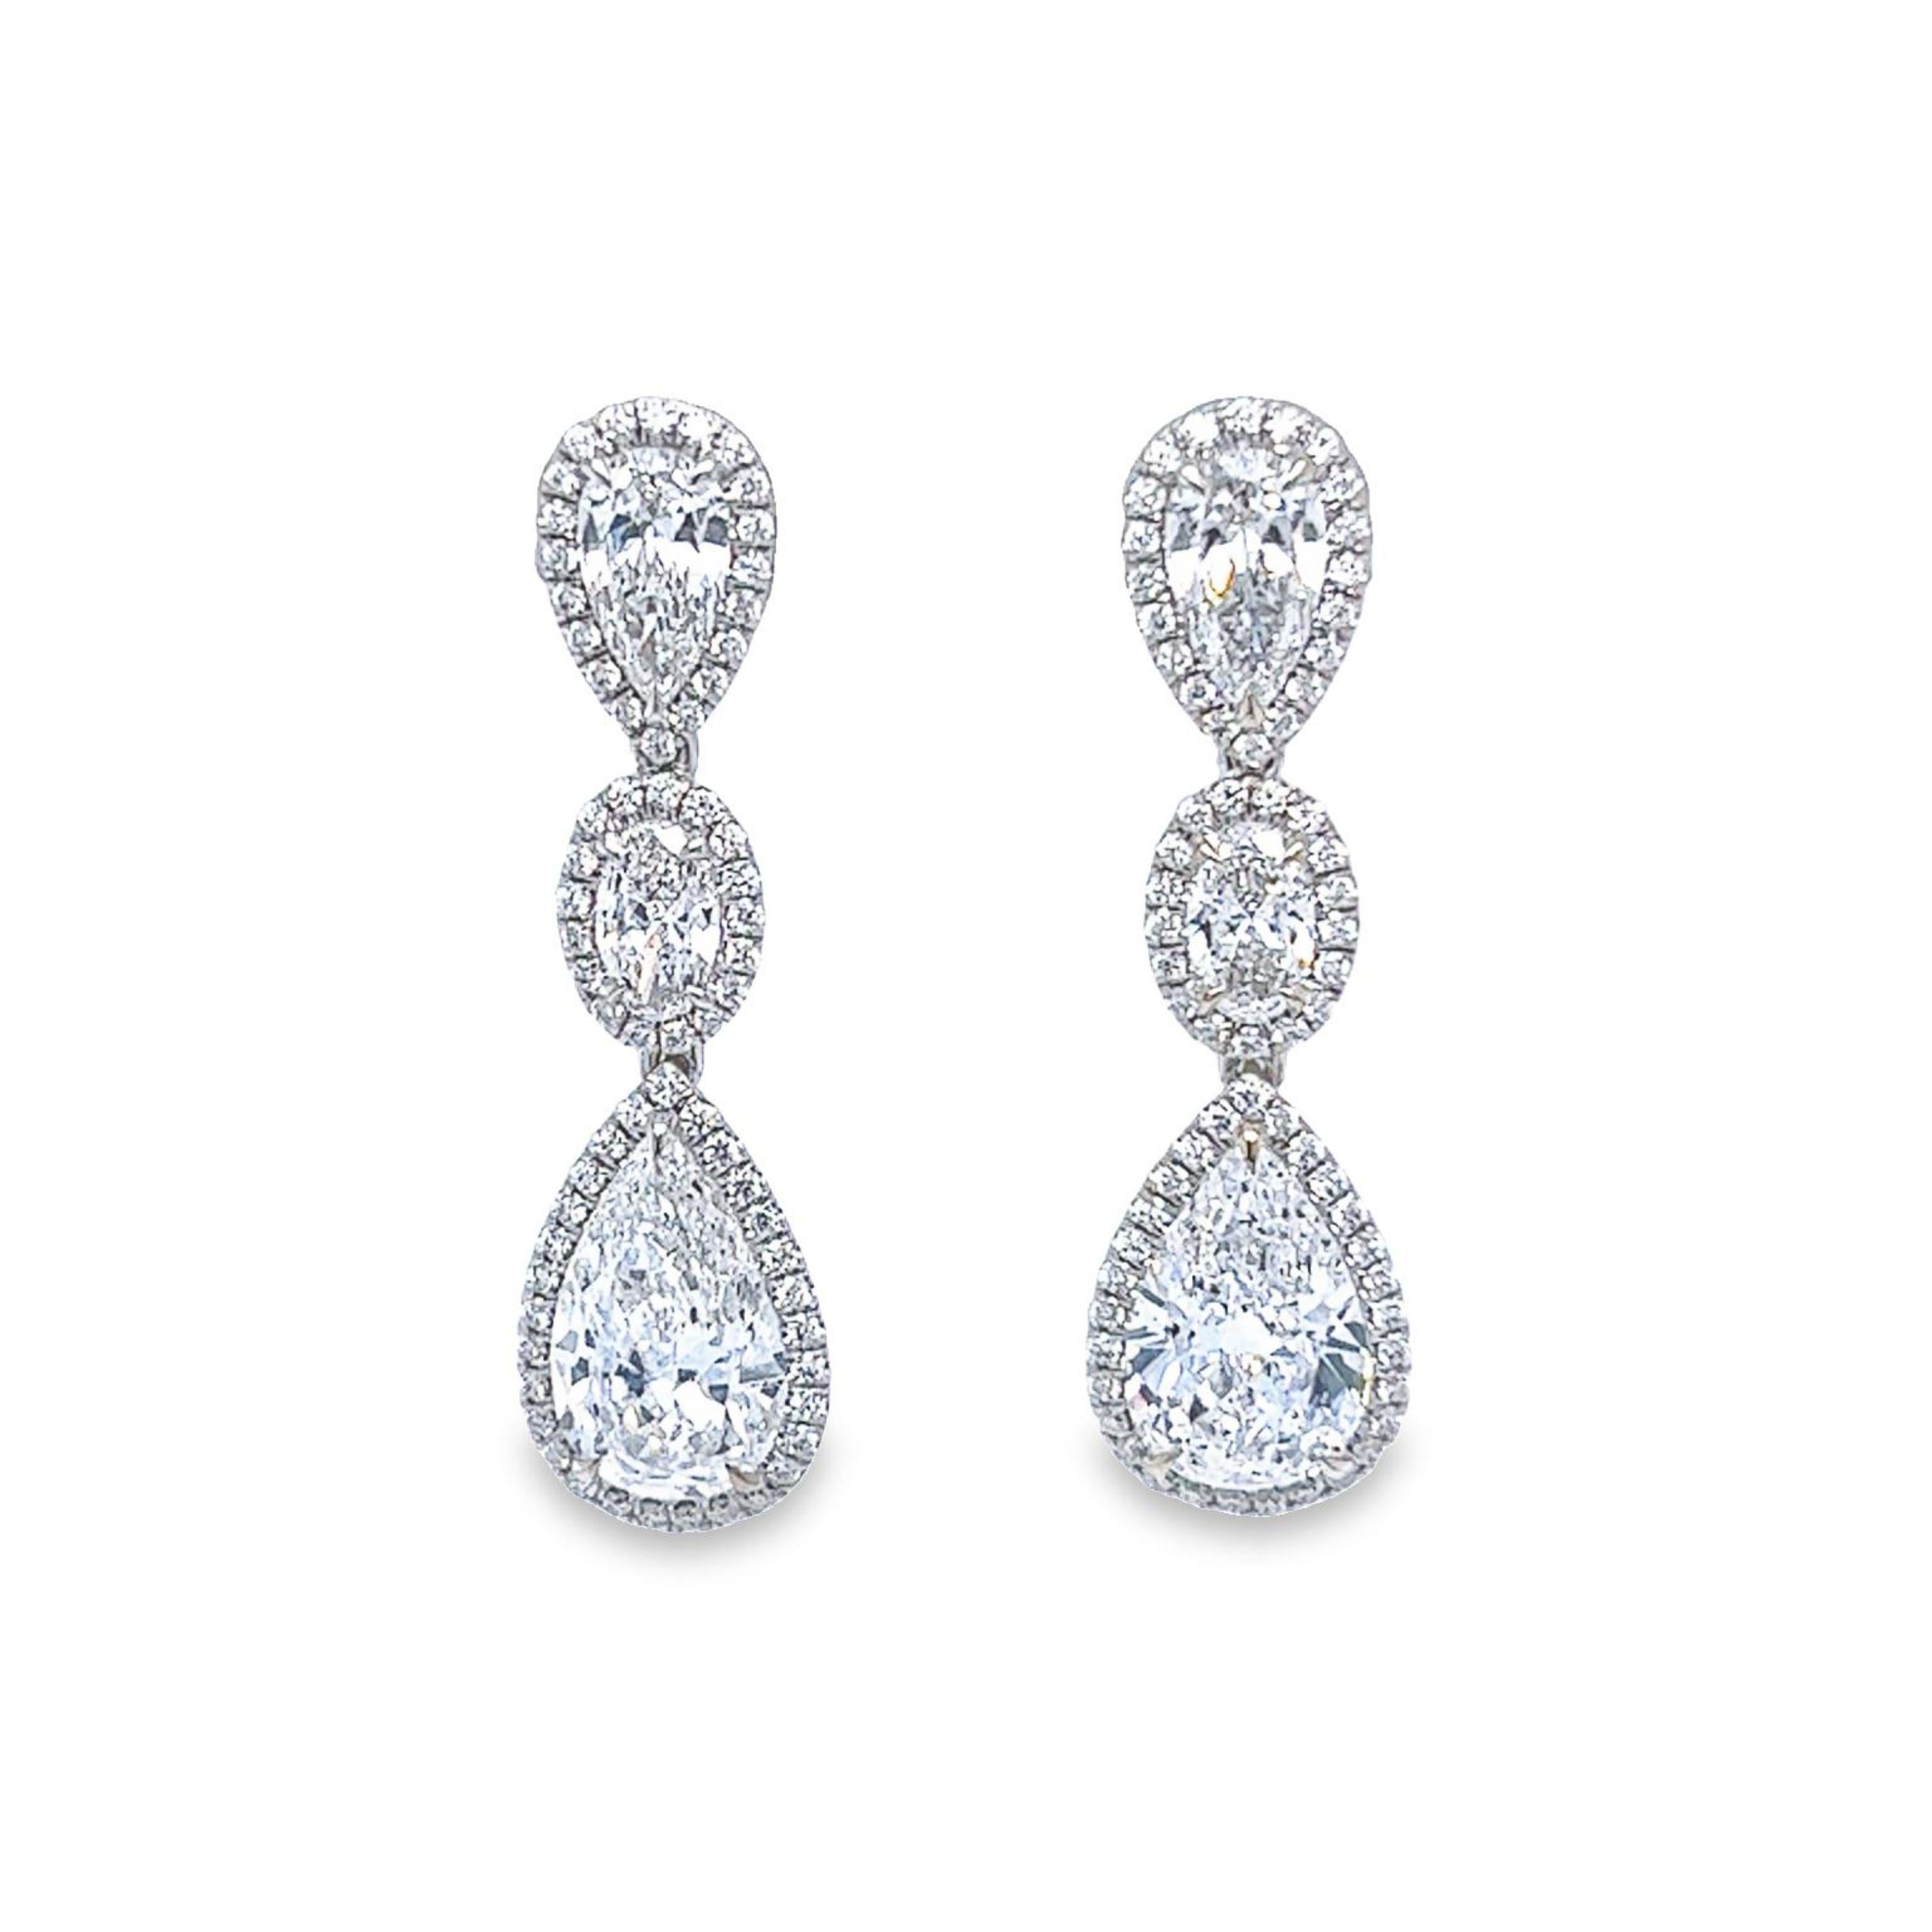 Get ready for a night out with this jaw dropping white diamond Pear & Oval shape earrings F in color SI2 clarity. This gorgeous 3 tier light weight earrings are set in 18k white gold and surrounded by a beautiful white halo with designed by David